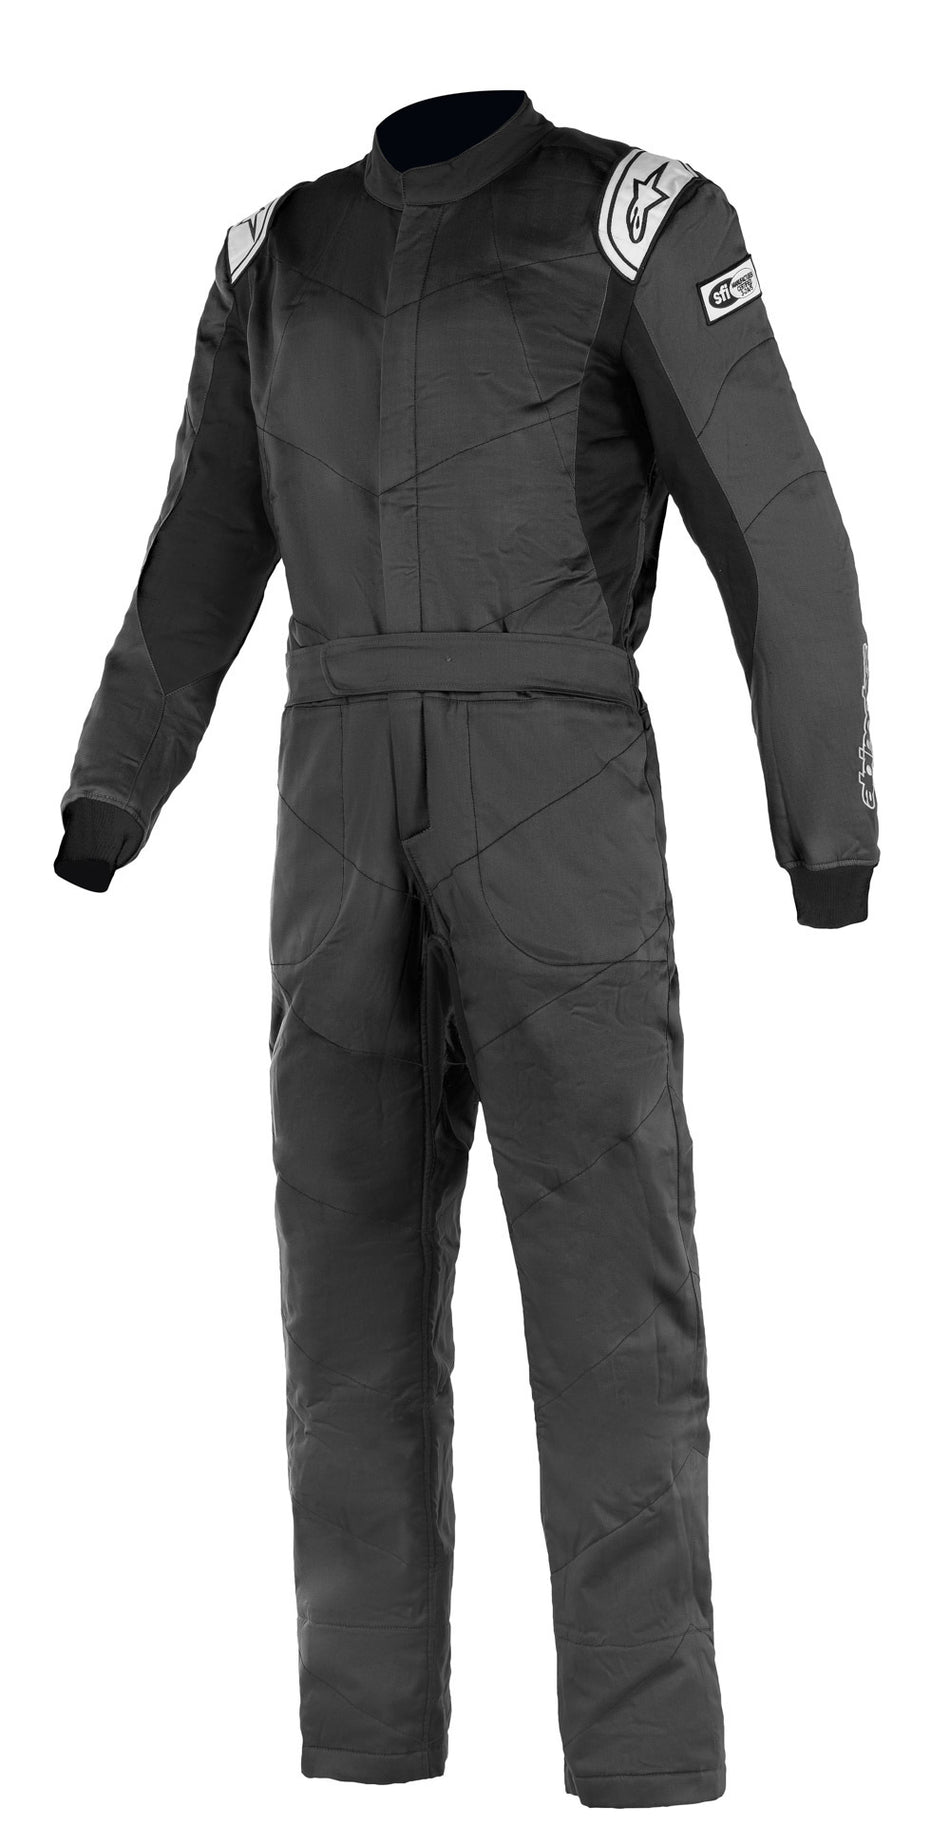 Driving Suit - Knoxville V2 - 1-Piece - SFI 3.2A/5 - Boot-Cut - Triple Layer - Fire Retardant Fabric - Black - Size 62 - X-Large / 2X-Large - Each